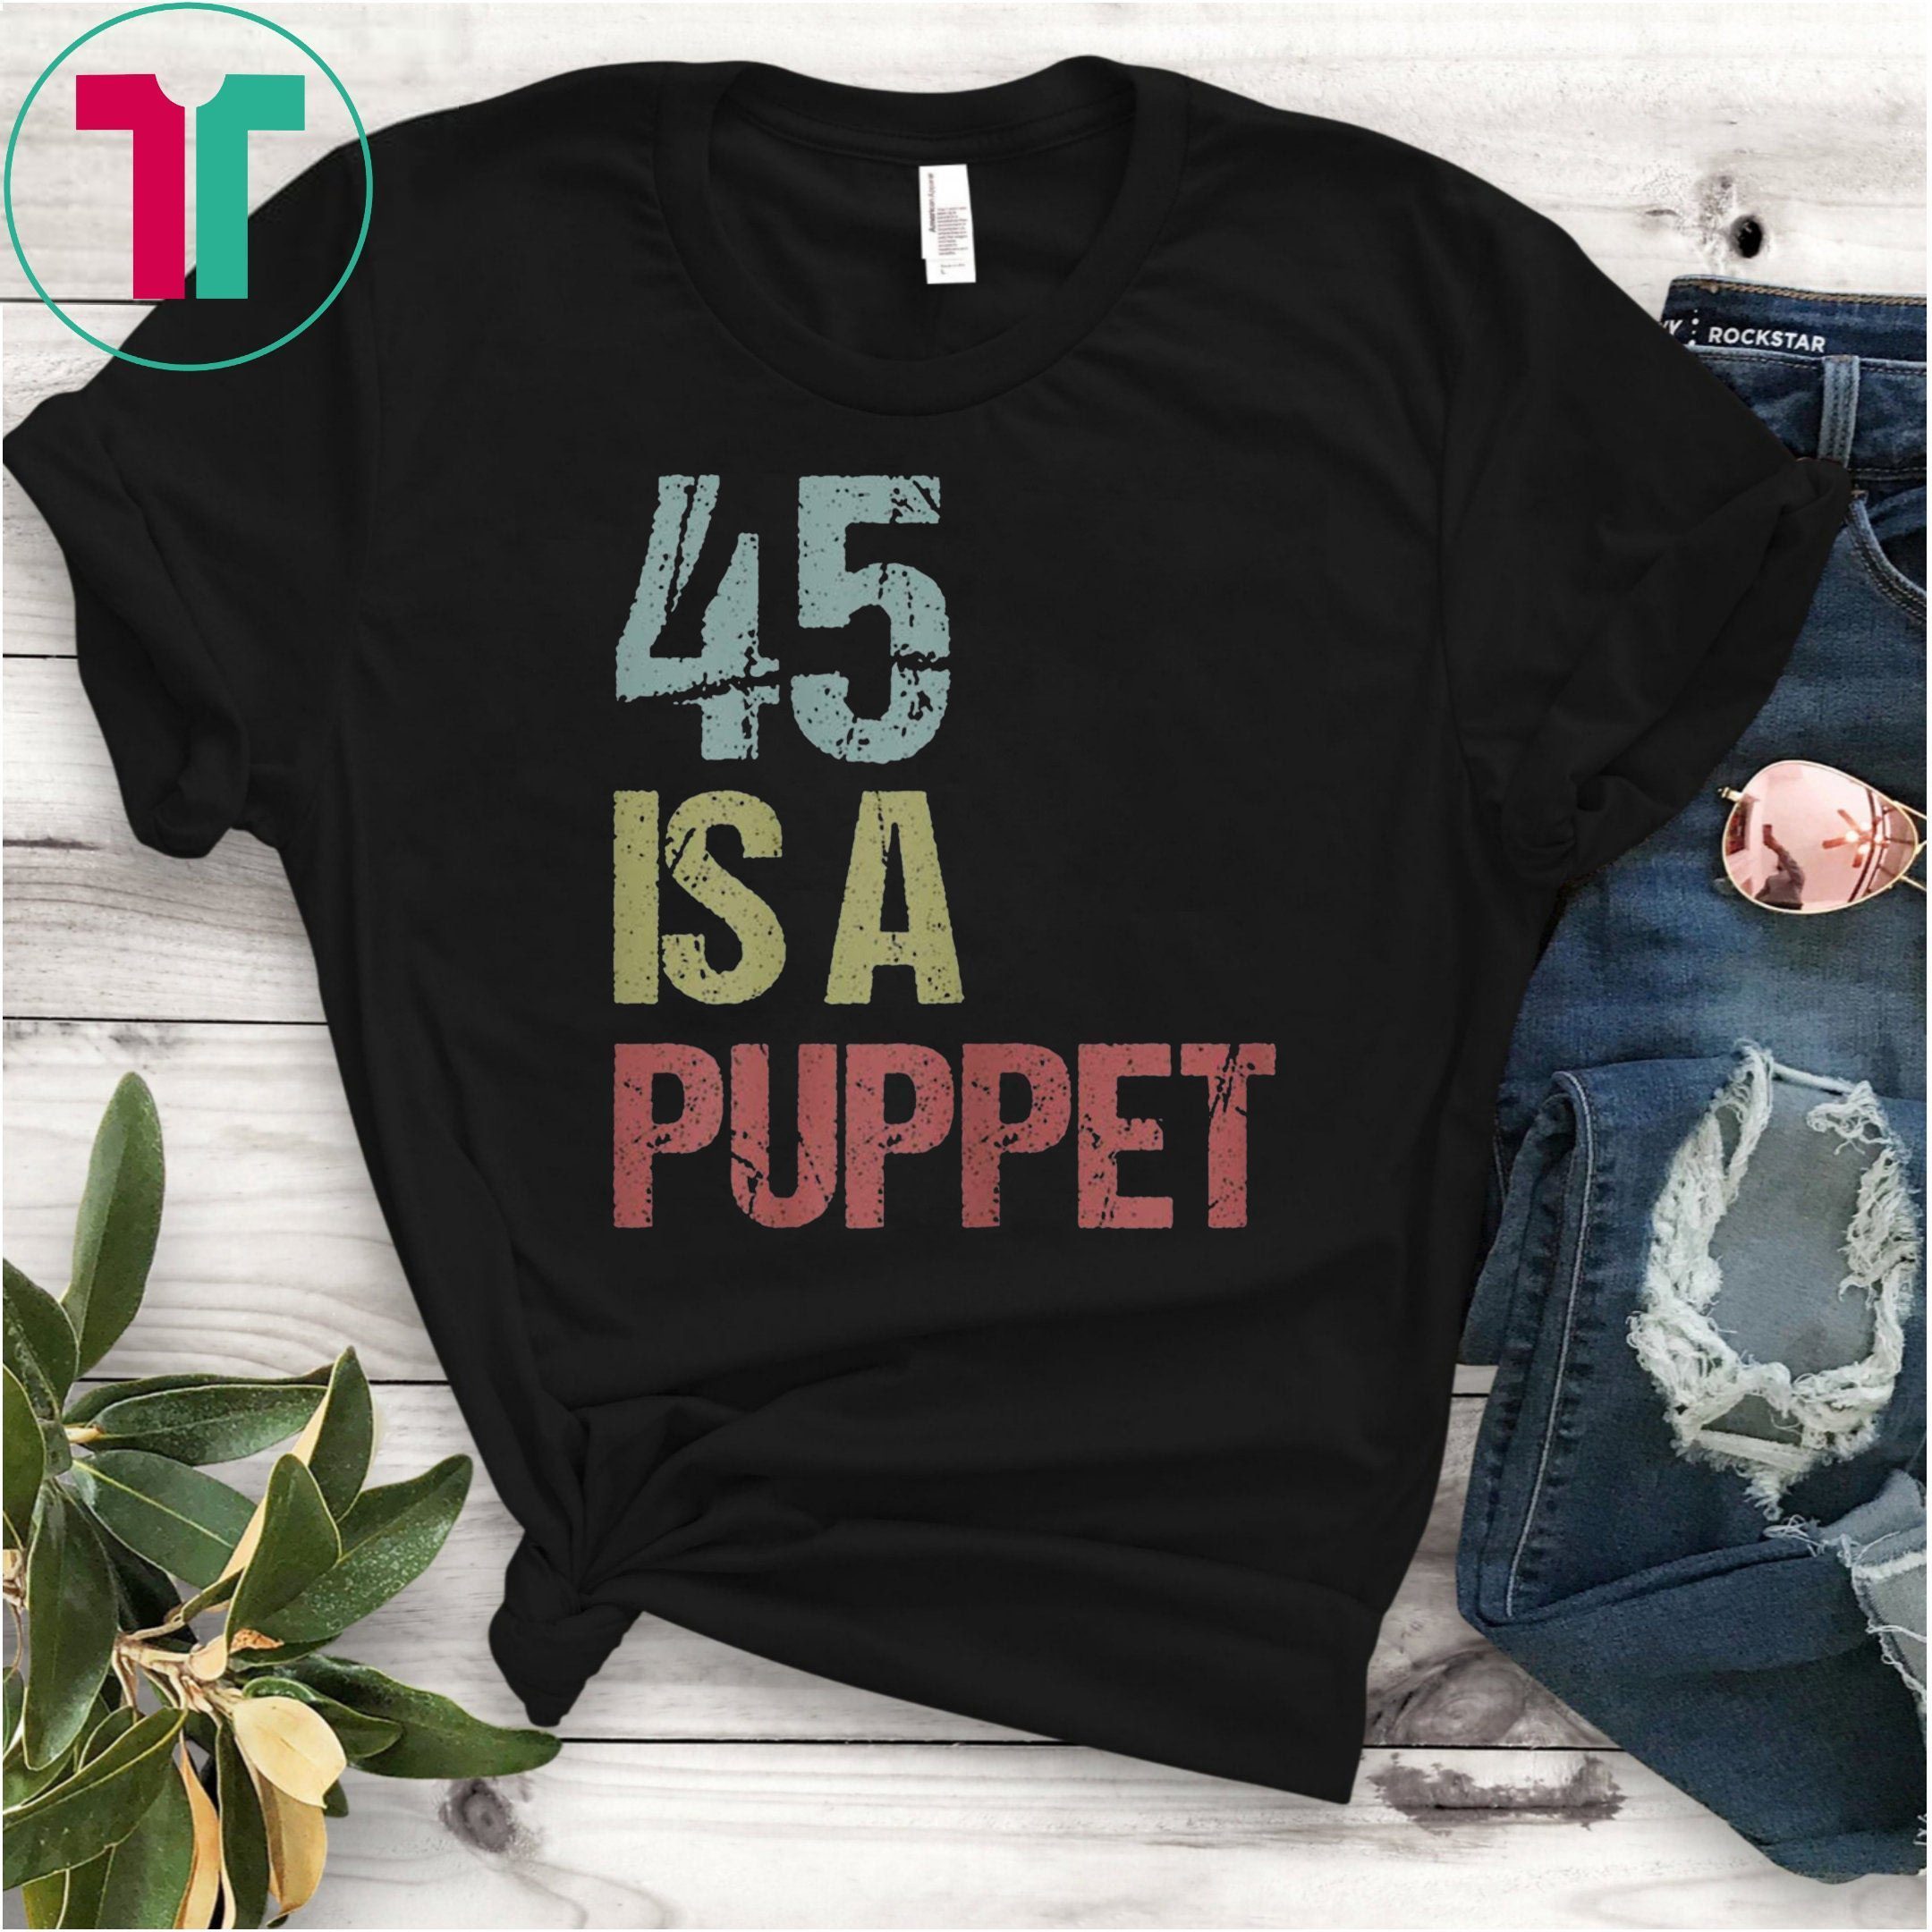 45 Is A Puppet Anti Trump Protest T-Shirt